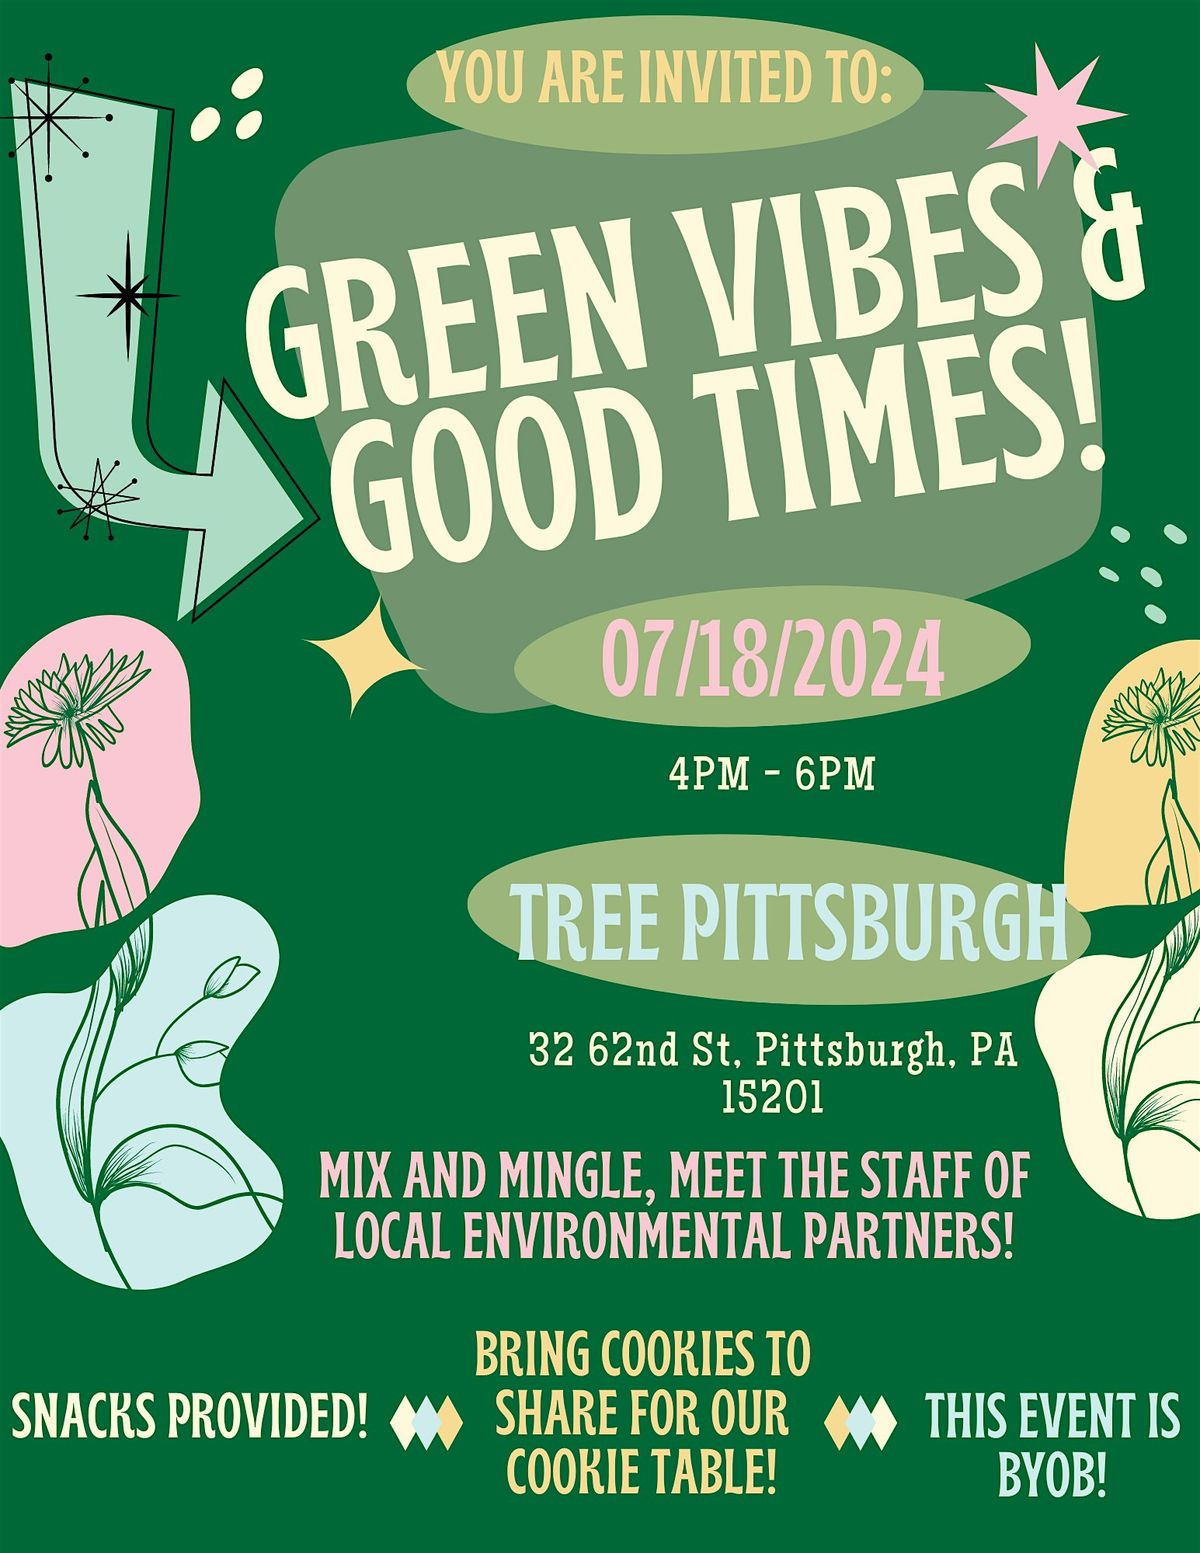 Green Vibes & Good Times!